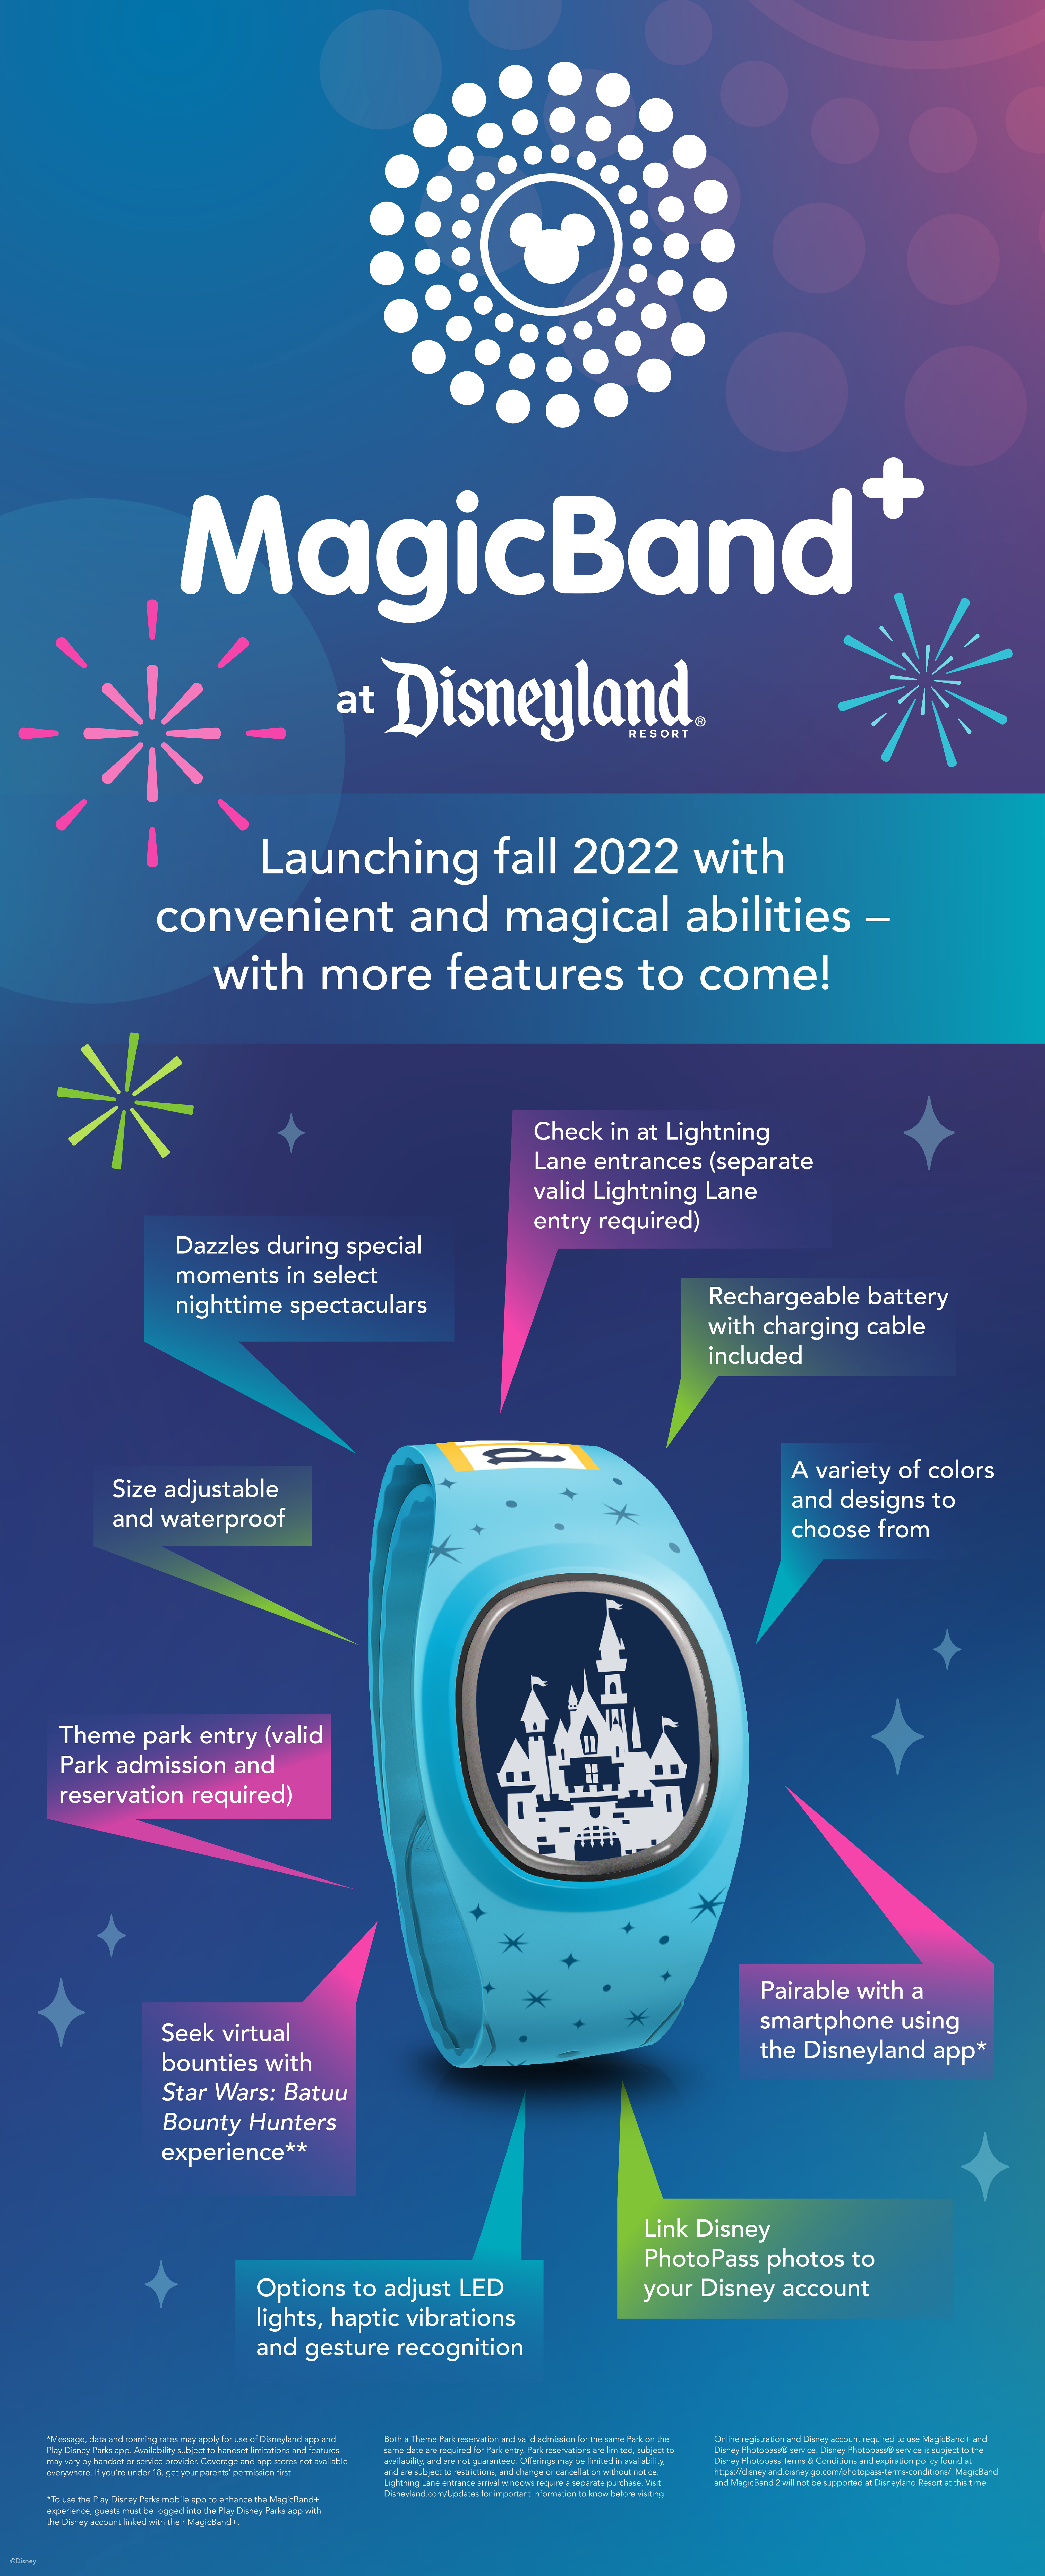 MagicBand+ shopDisney Release Information Revealed - WDW News Today